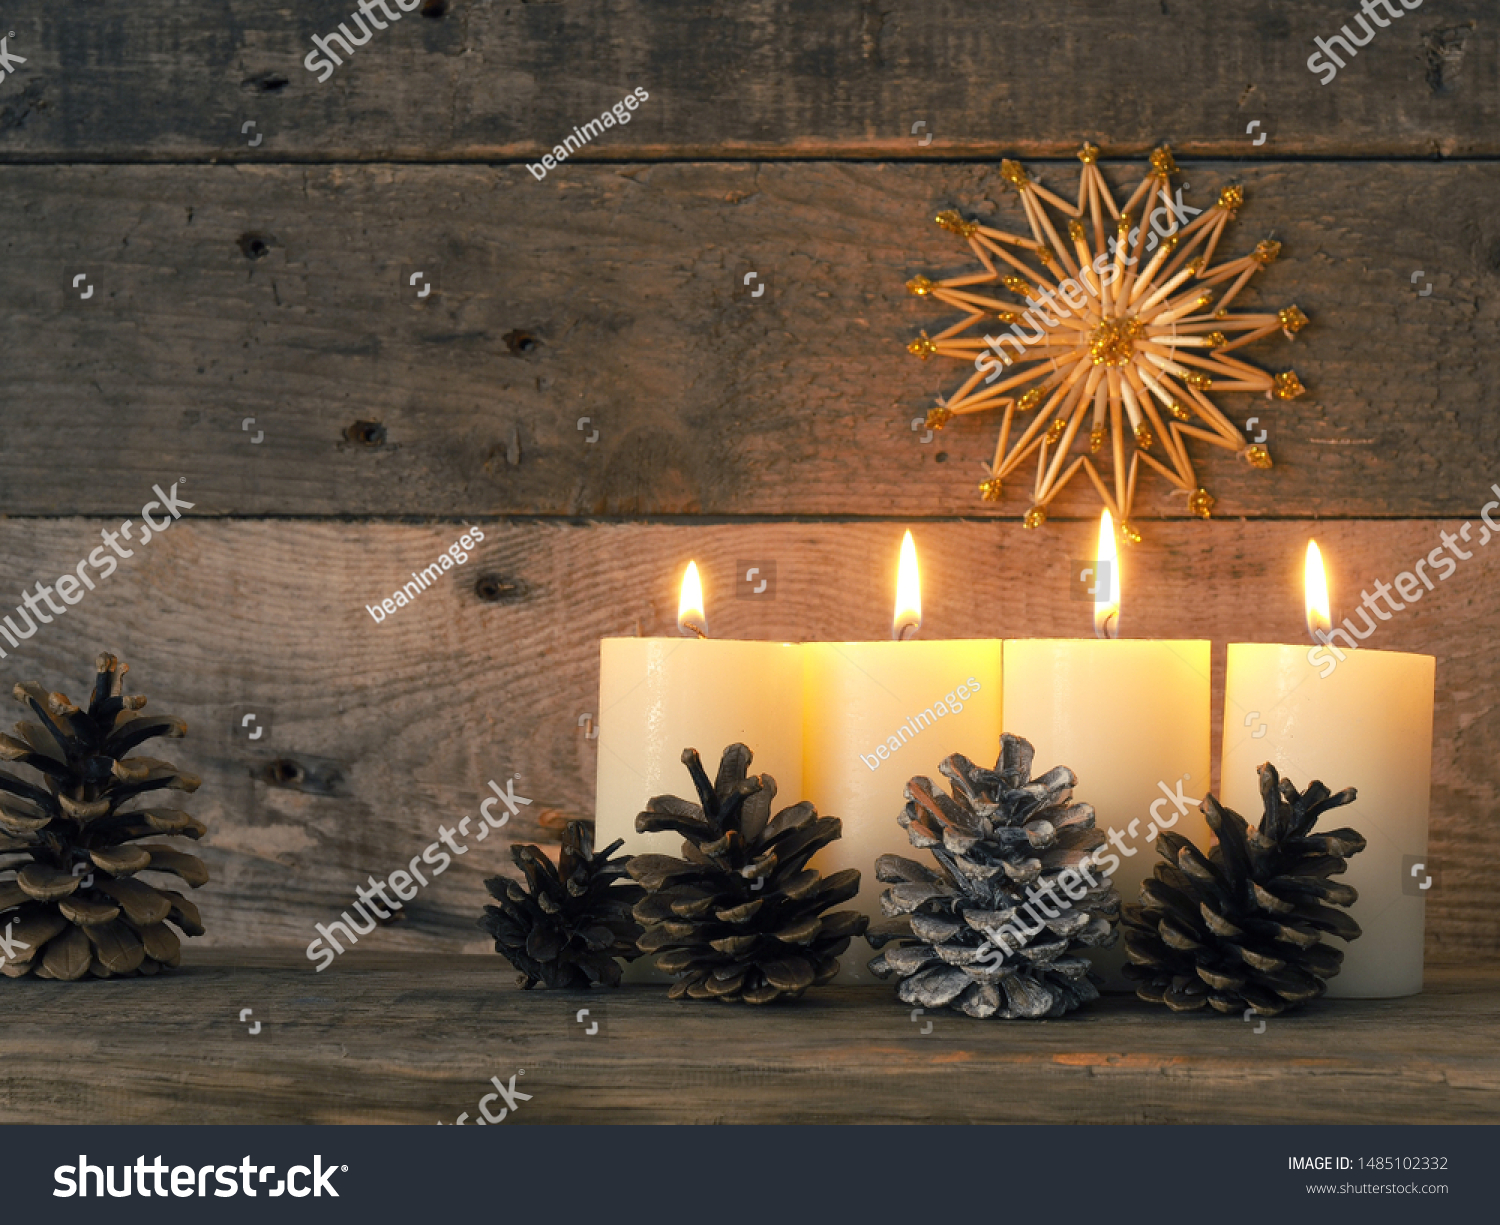 Four Advent candles are burning, fourth Advent candle burns, Christmas concept #1485102332